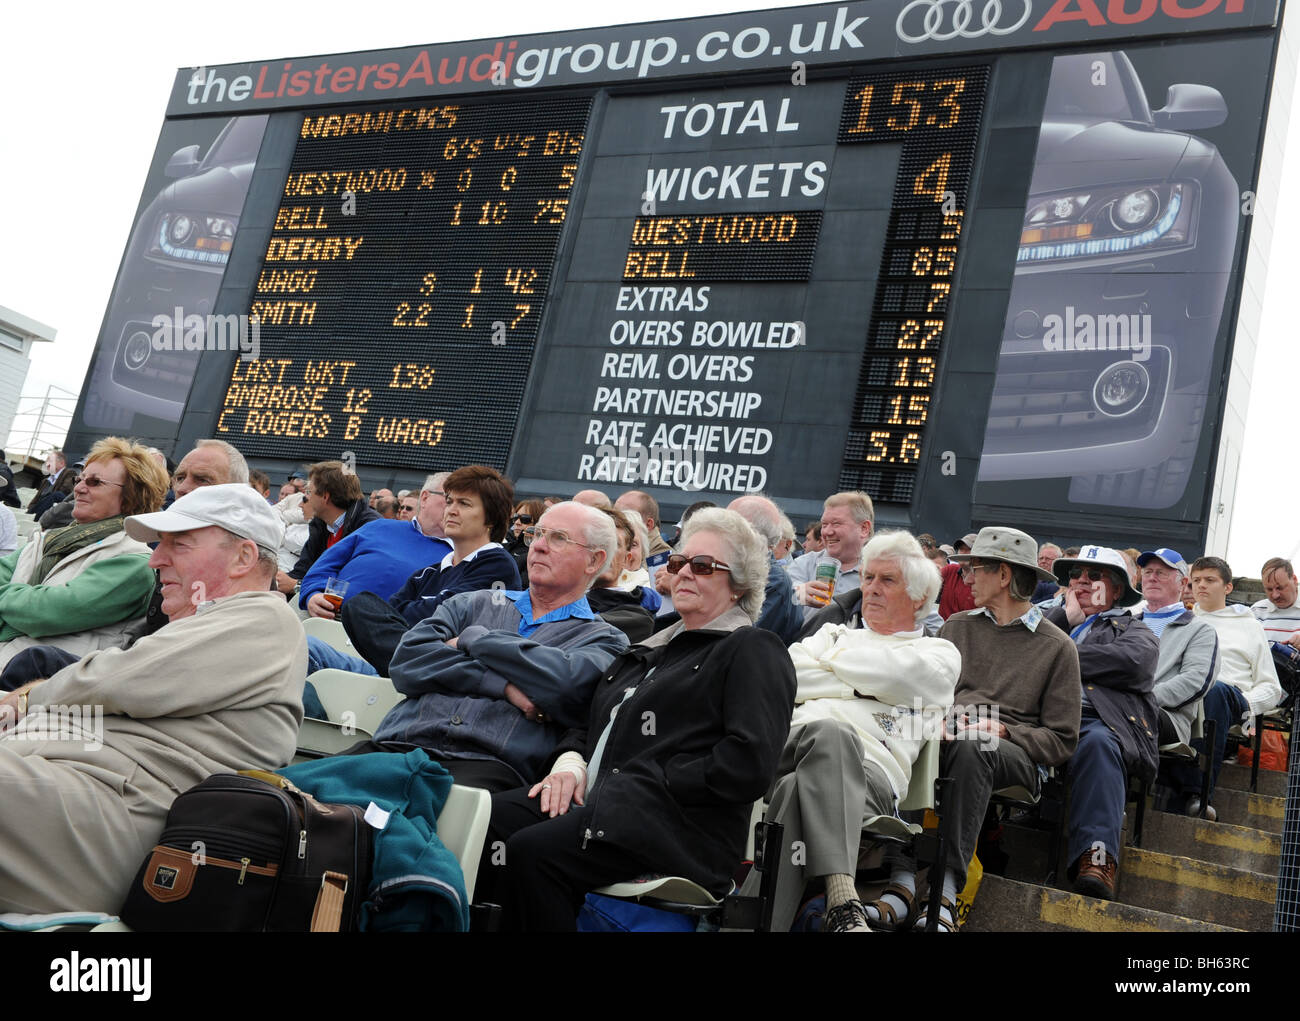 Cricket fans watching Warwickshire County Cricket Clubs last match in front of the old Edgbaston scoreboard 6/9/09 Stock Photo